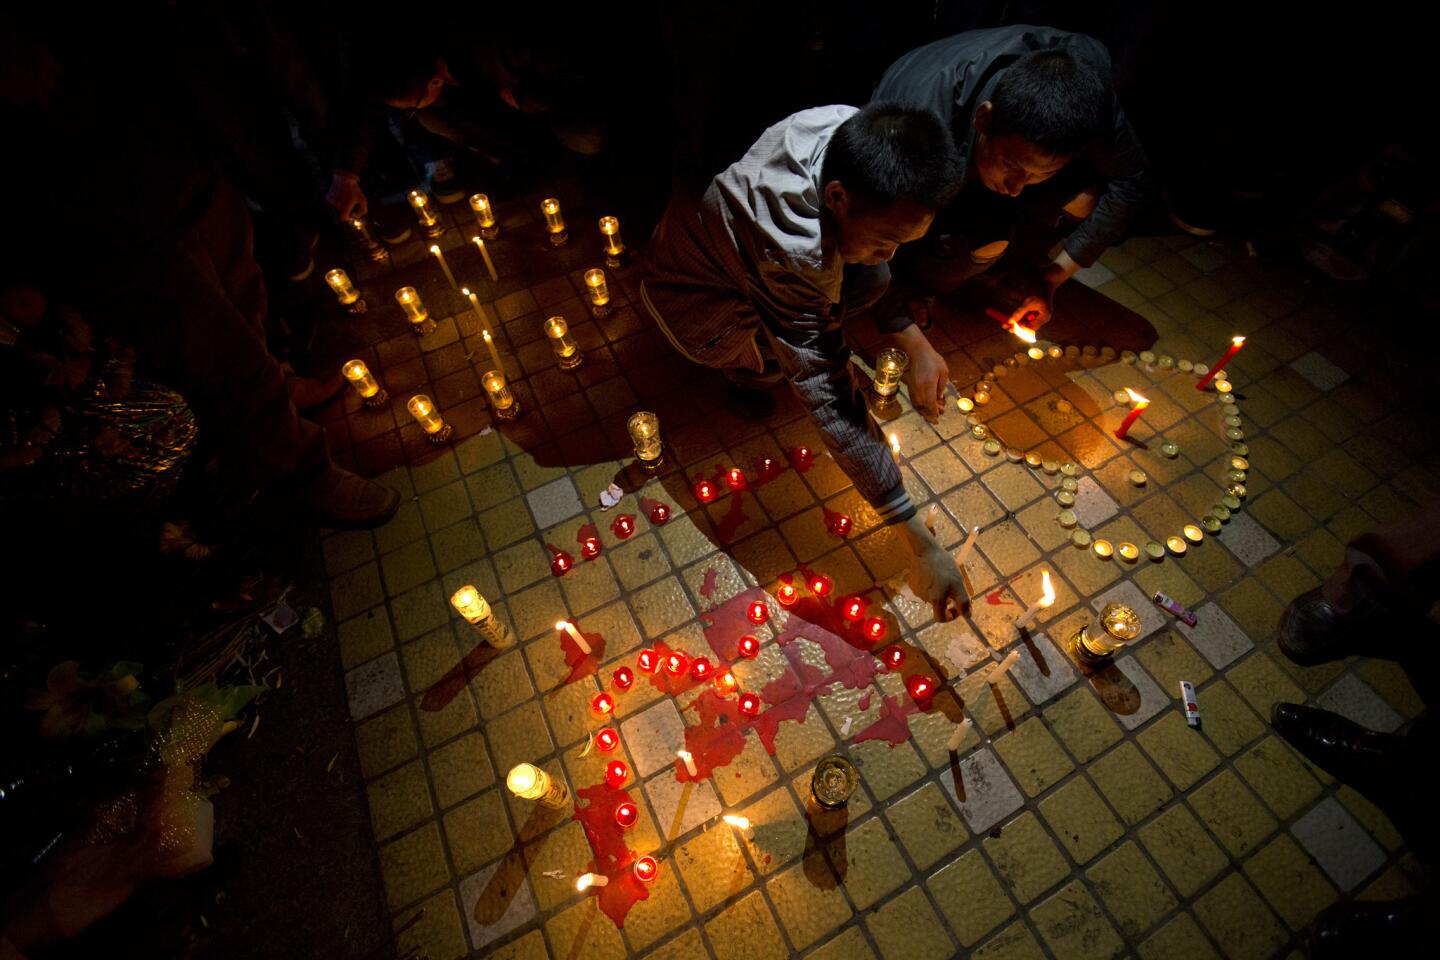 Two men light candles before a group prayer for the victims on a square outside the Kunming Railway Station where assailants slashed scores of people with knives the night before.